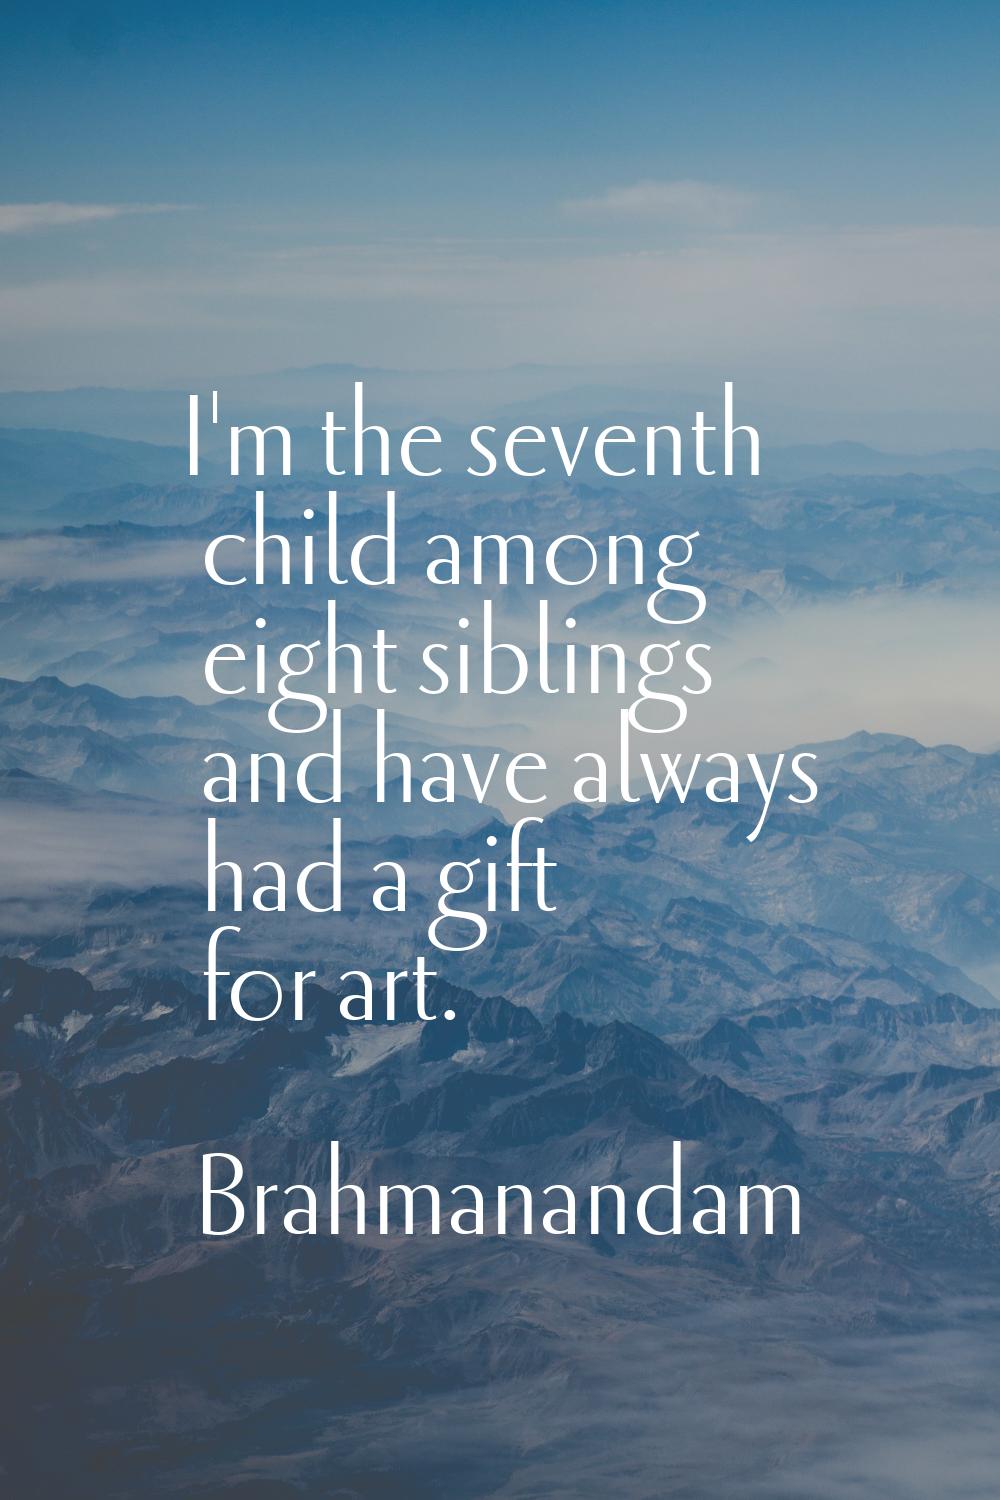 I'm the seventh child among eight siblings and have always had a gift for art.